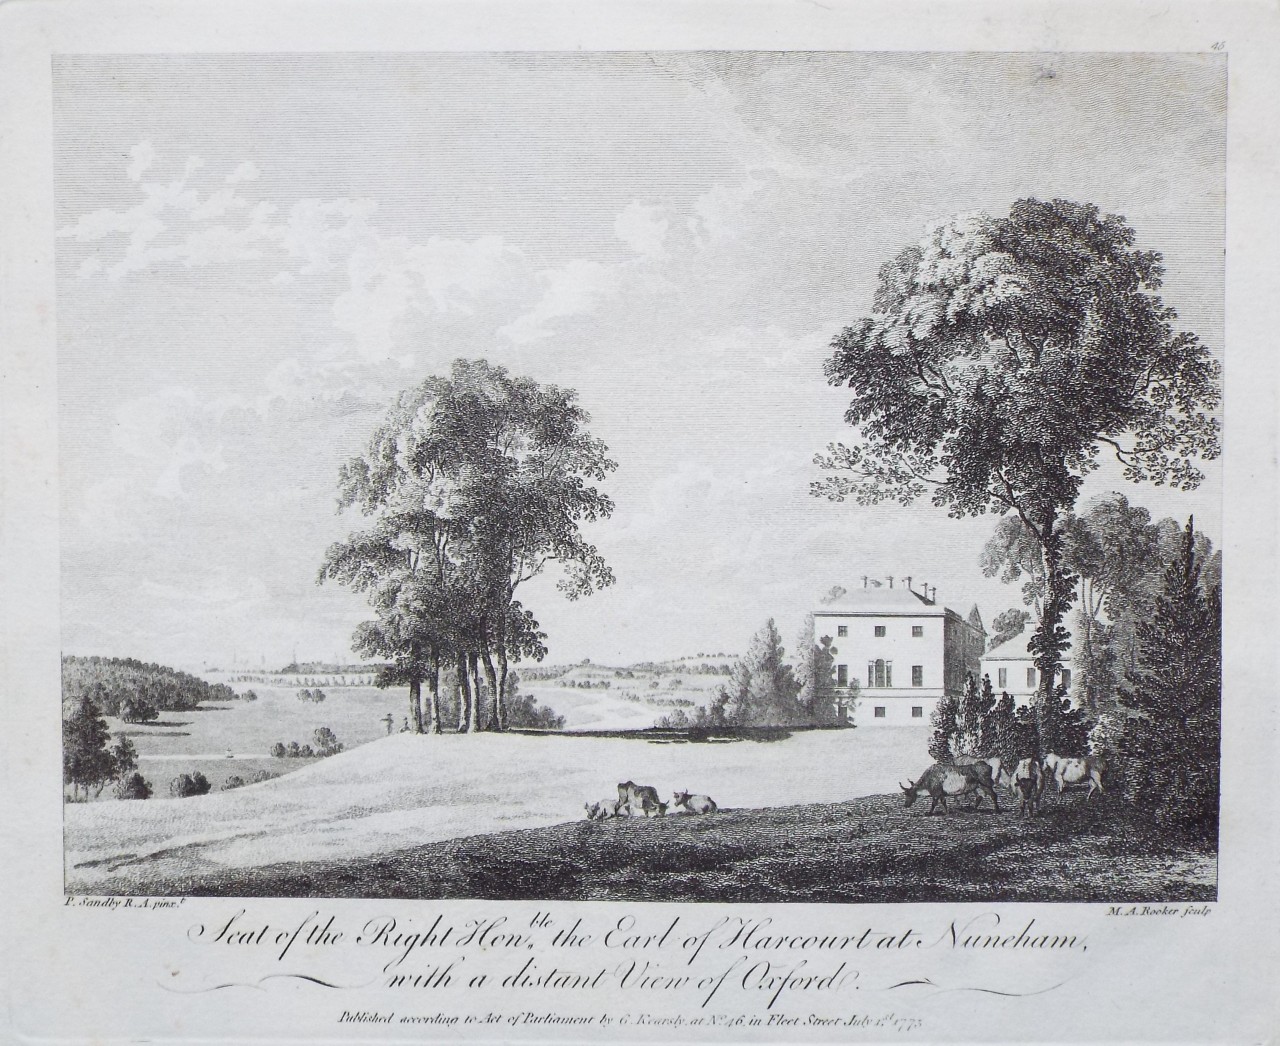 Print - Seat of the Right Honble. the Earl of Harcourt at Nuneham, with a distant View of Oxford. - Rooker